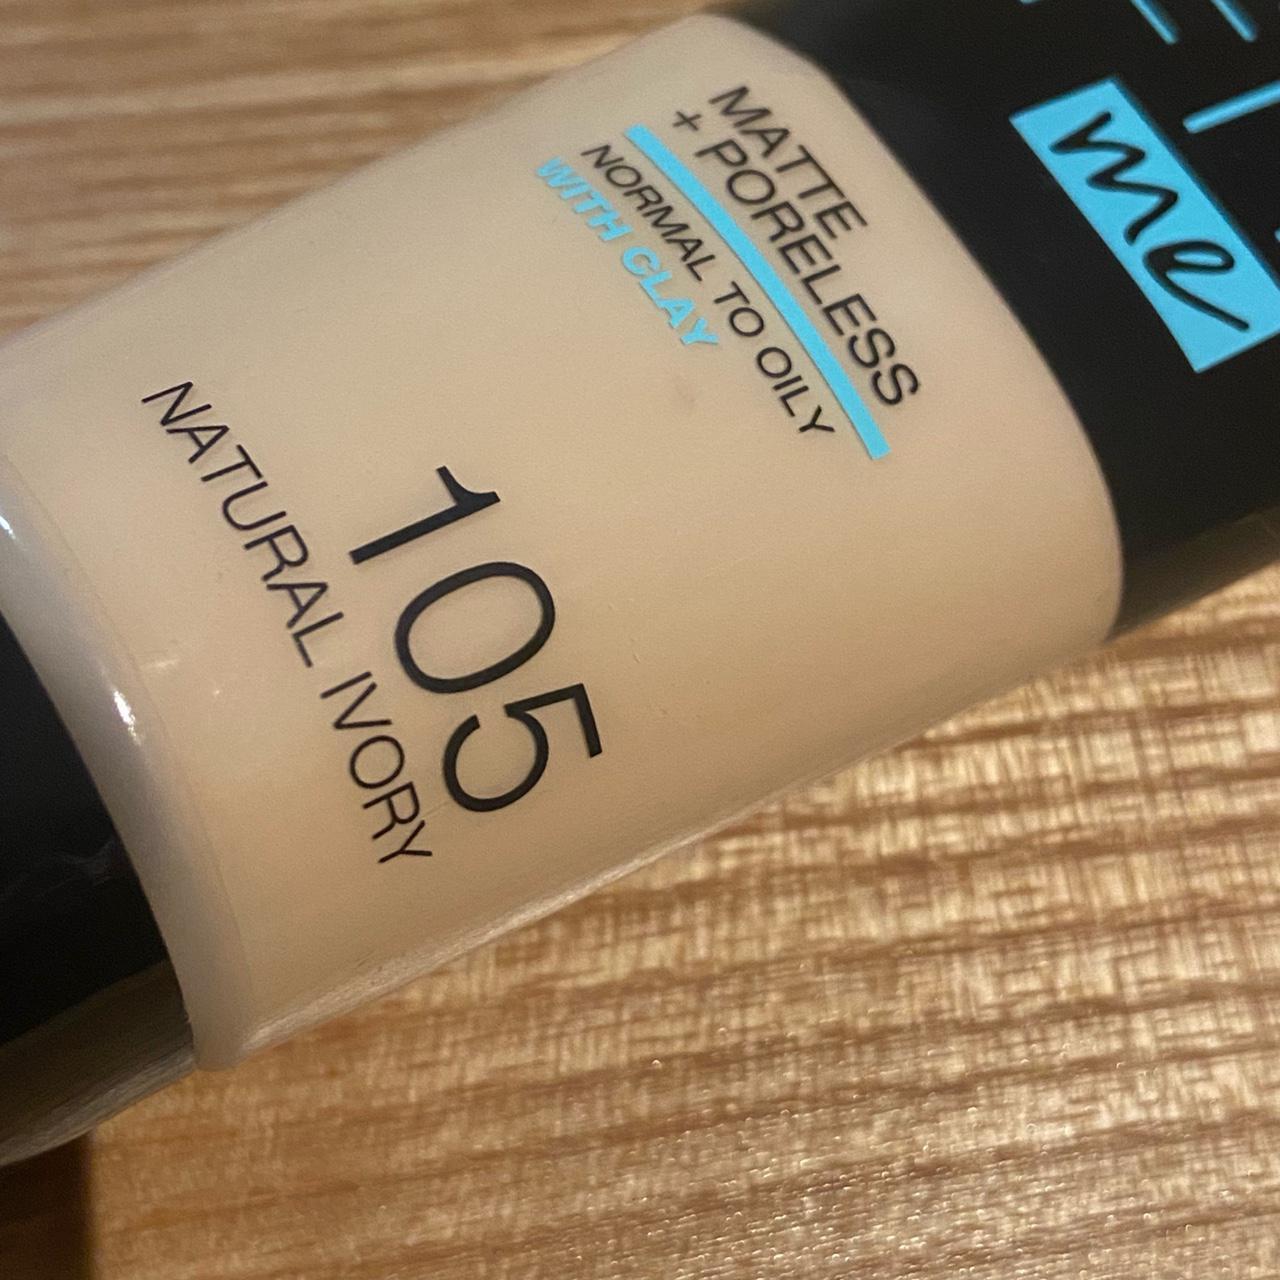 Product Image 2 - New Maybelline fit me foundation